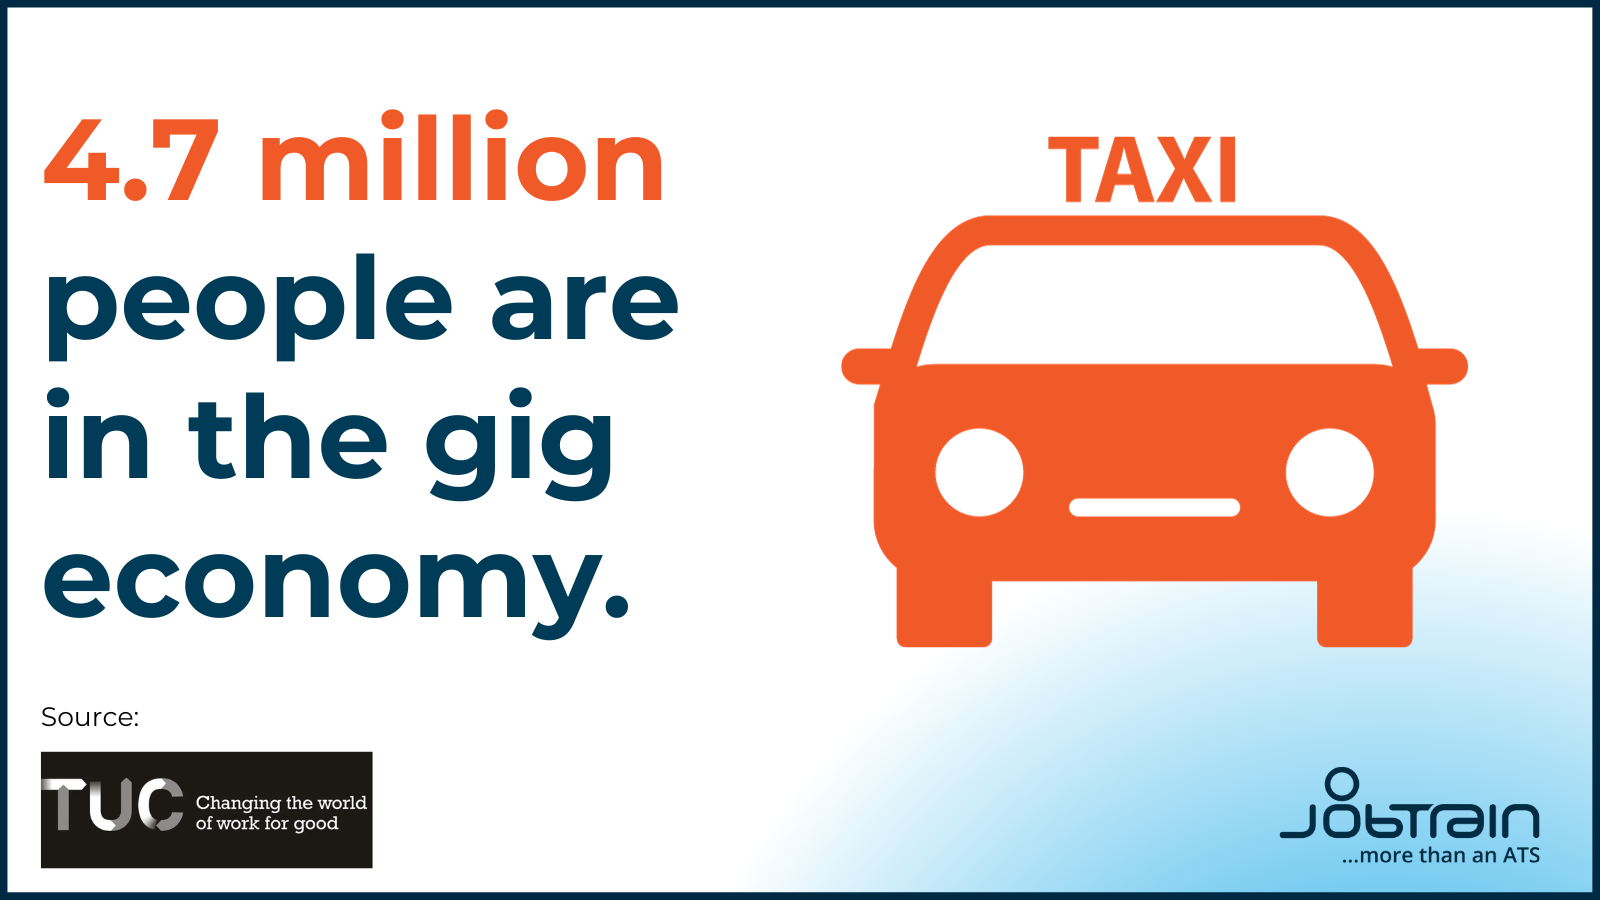 JobBrain Stats - 4.7 million people are in the gig economy